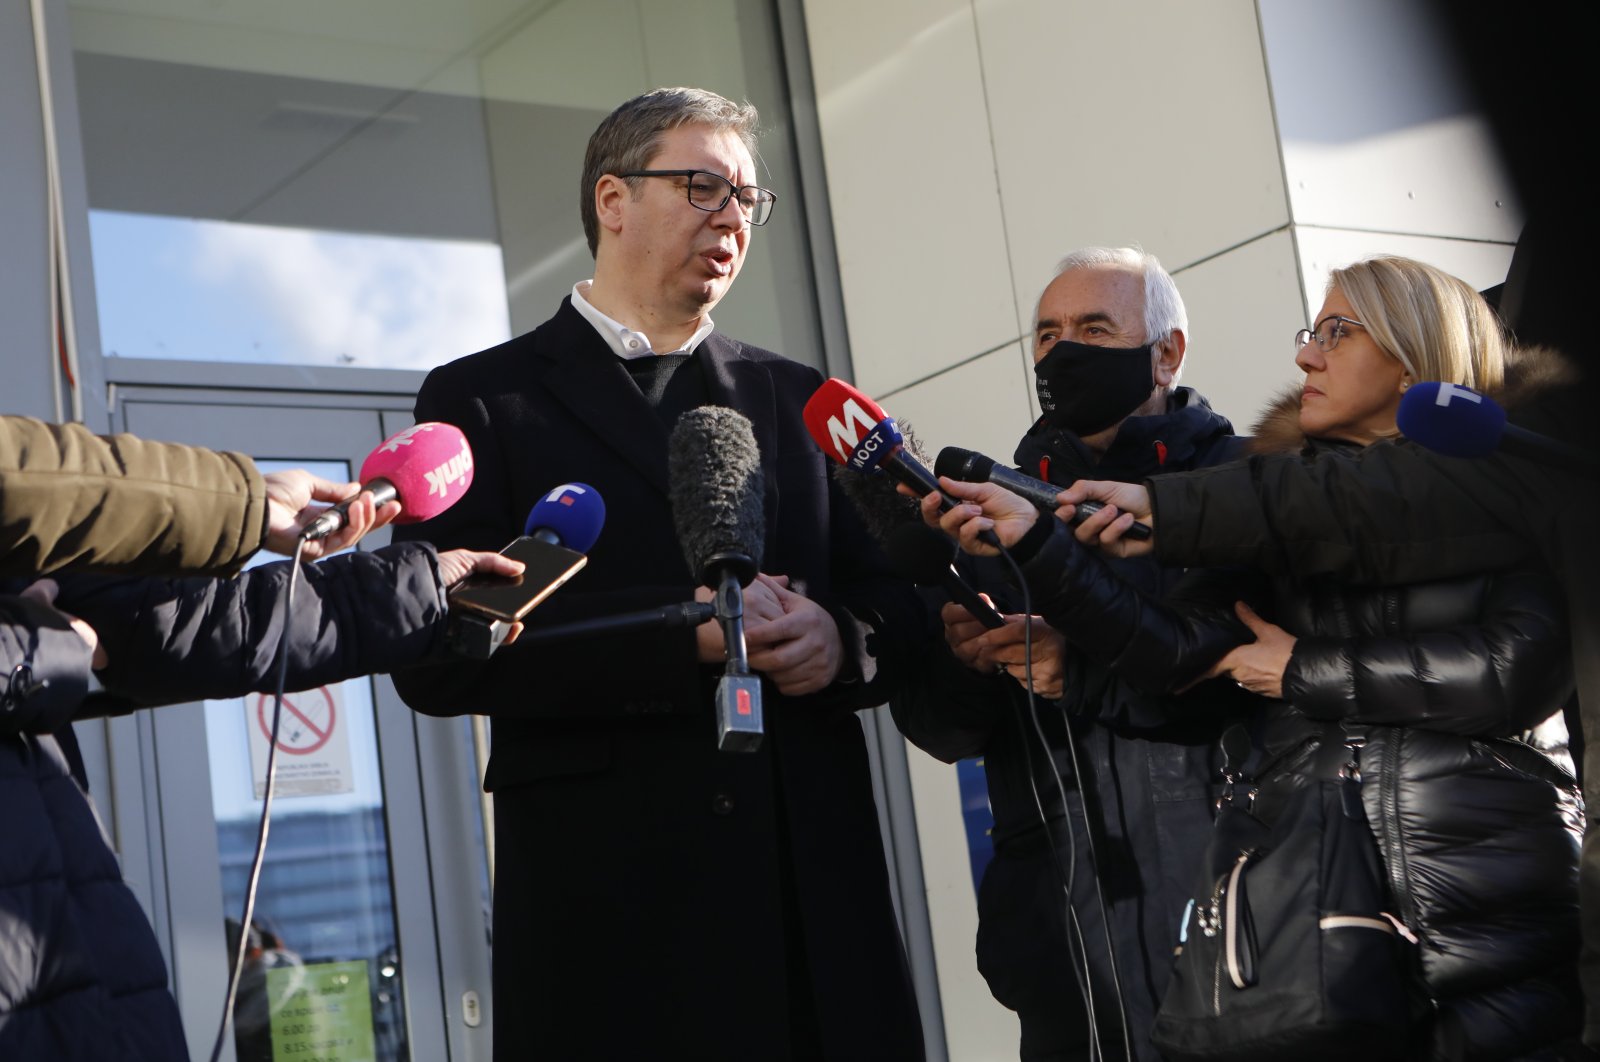 Serbian President Aleksandar Vucic addresses the media after casting a ballot during the referendum on constitutional changes in Belgrade, Serbia, 16 January 2022. (EPA Photo)